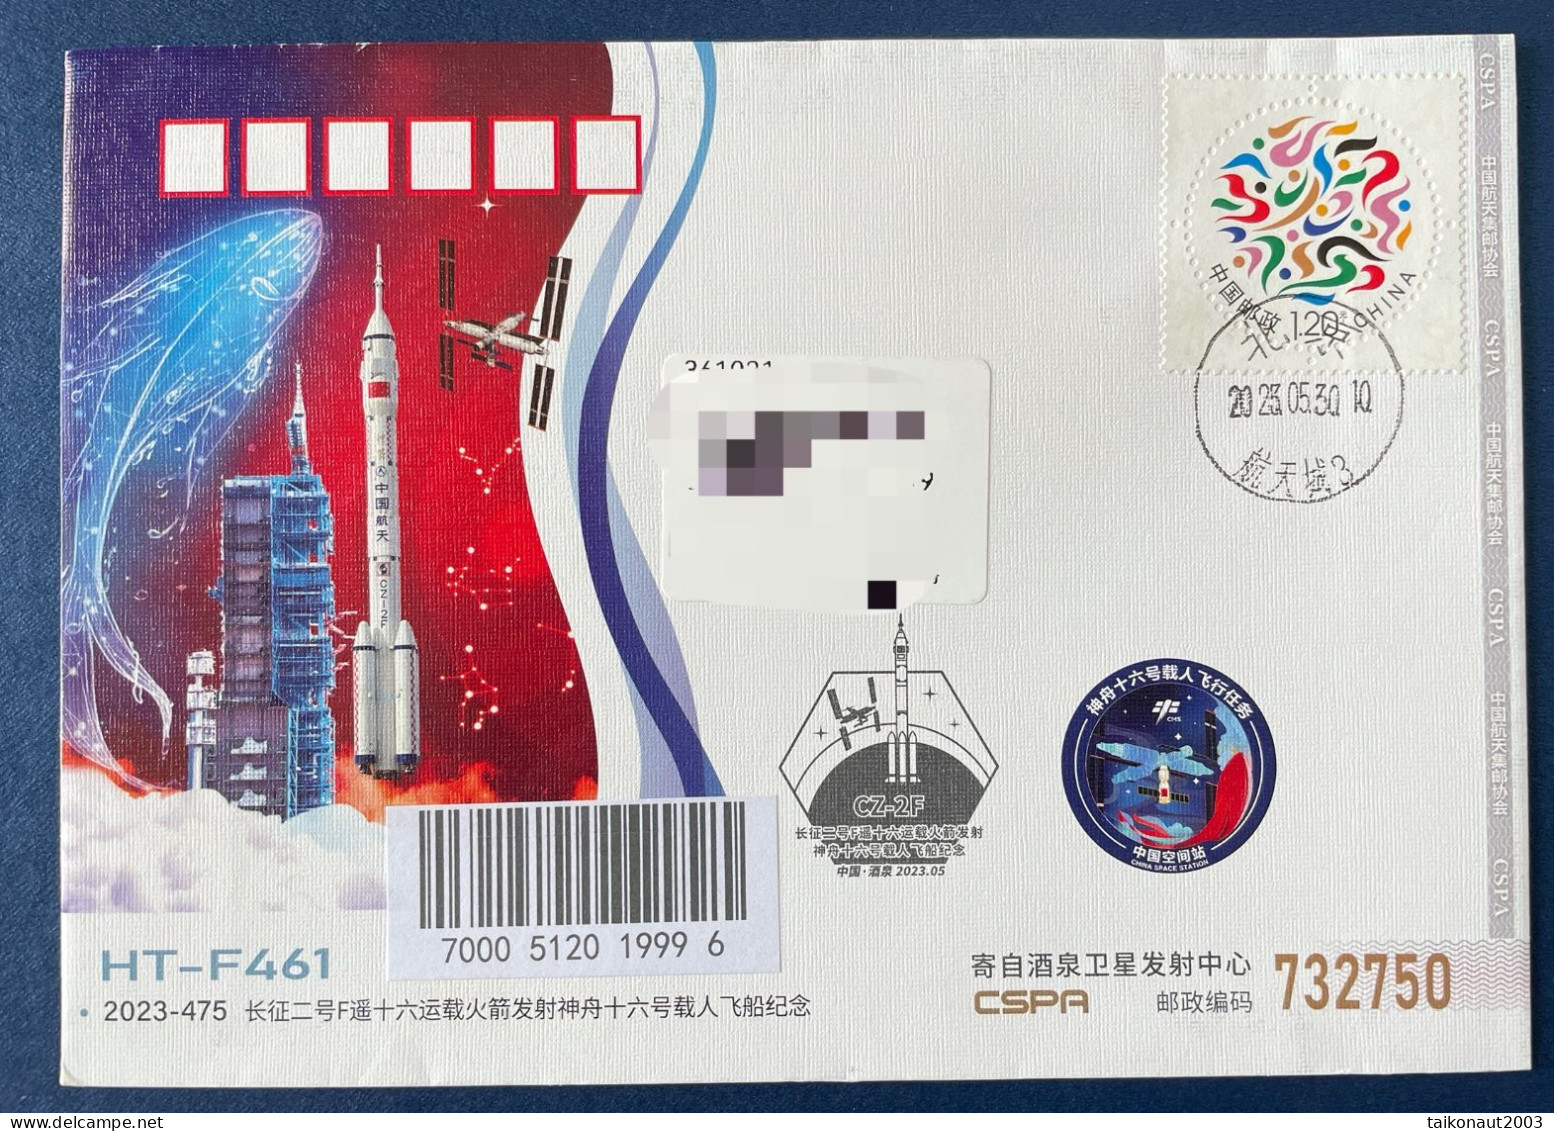 China Space 2023 Shenzhou-16 Manned Spaceship Launch Space Flight Control Cover, Beijing Center - Asia